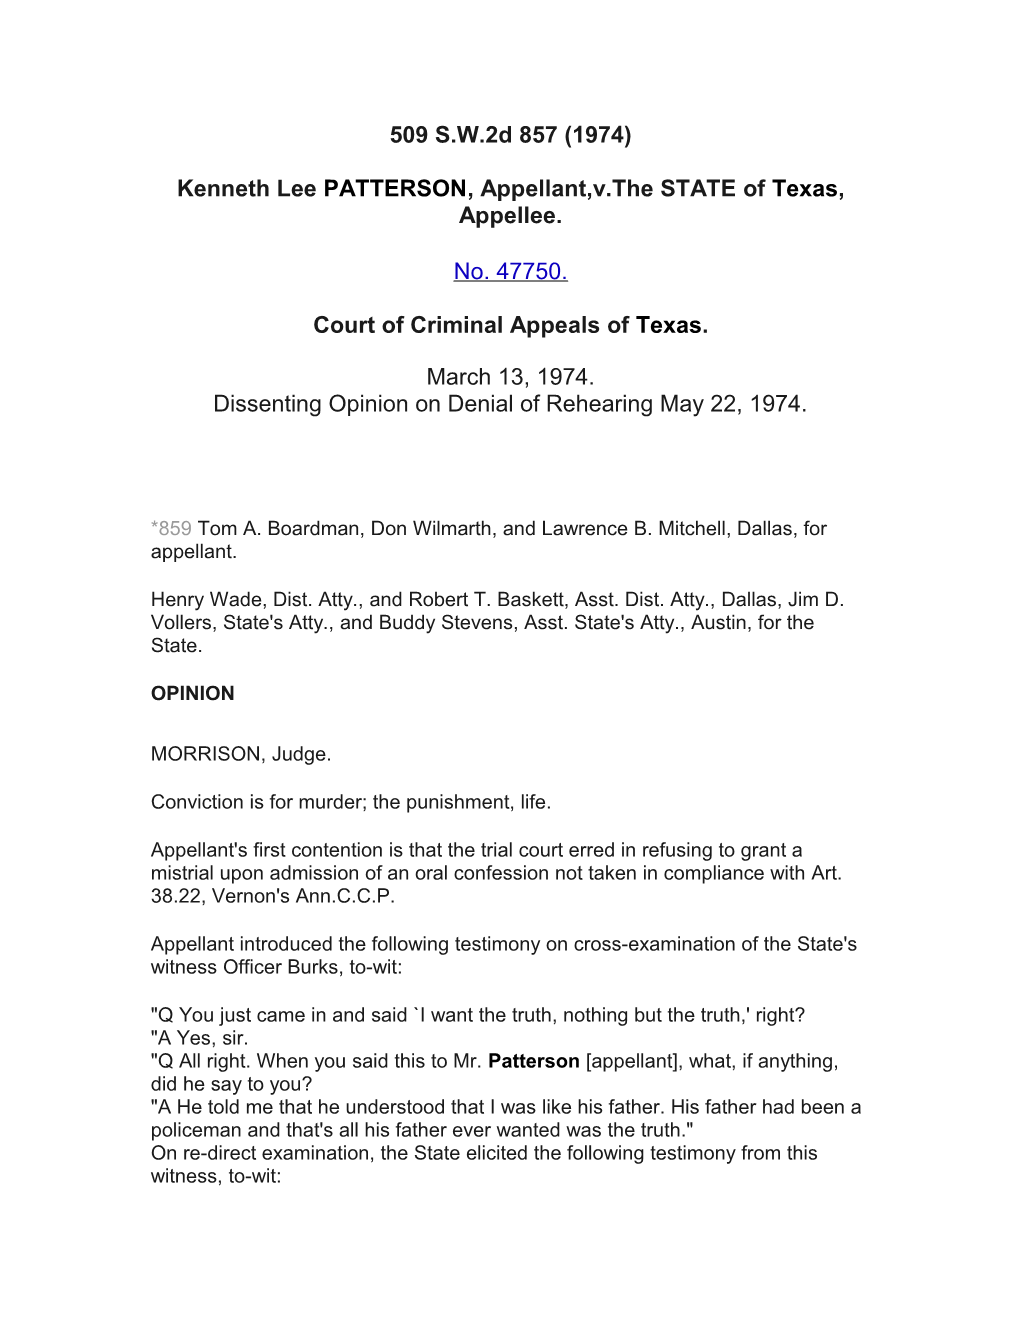 Kenneth Lee PATTERSON, Appellant, V. the STATE of Texas, Appellee